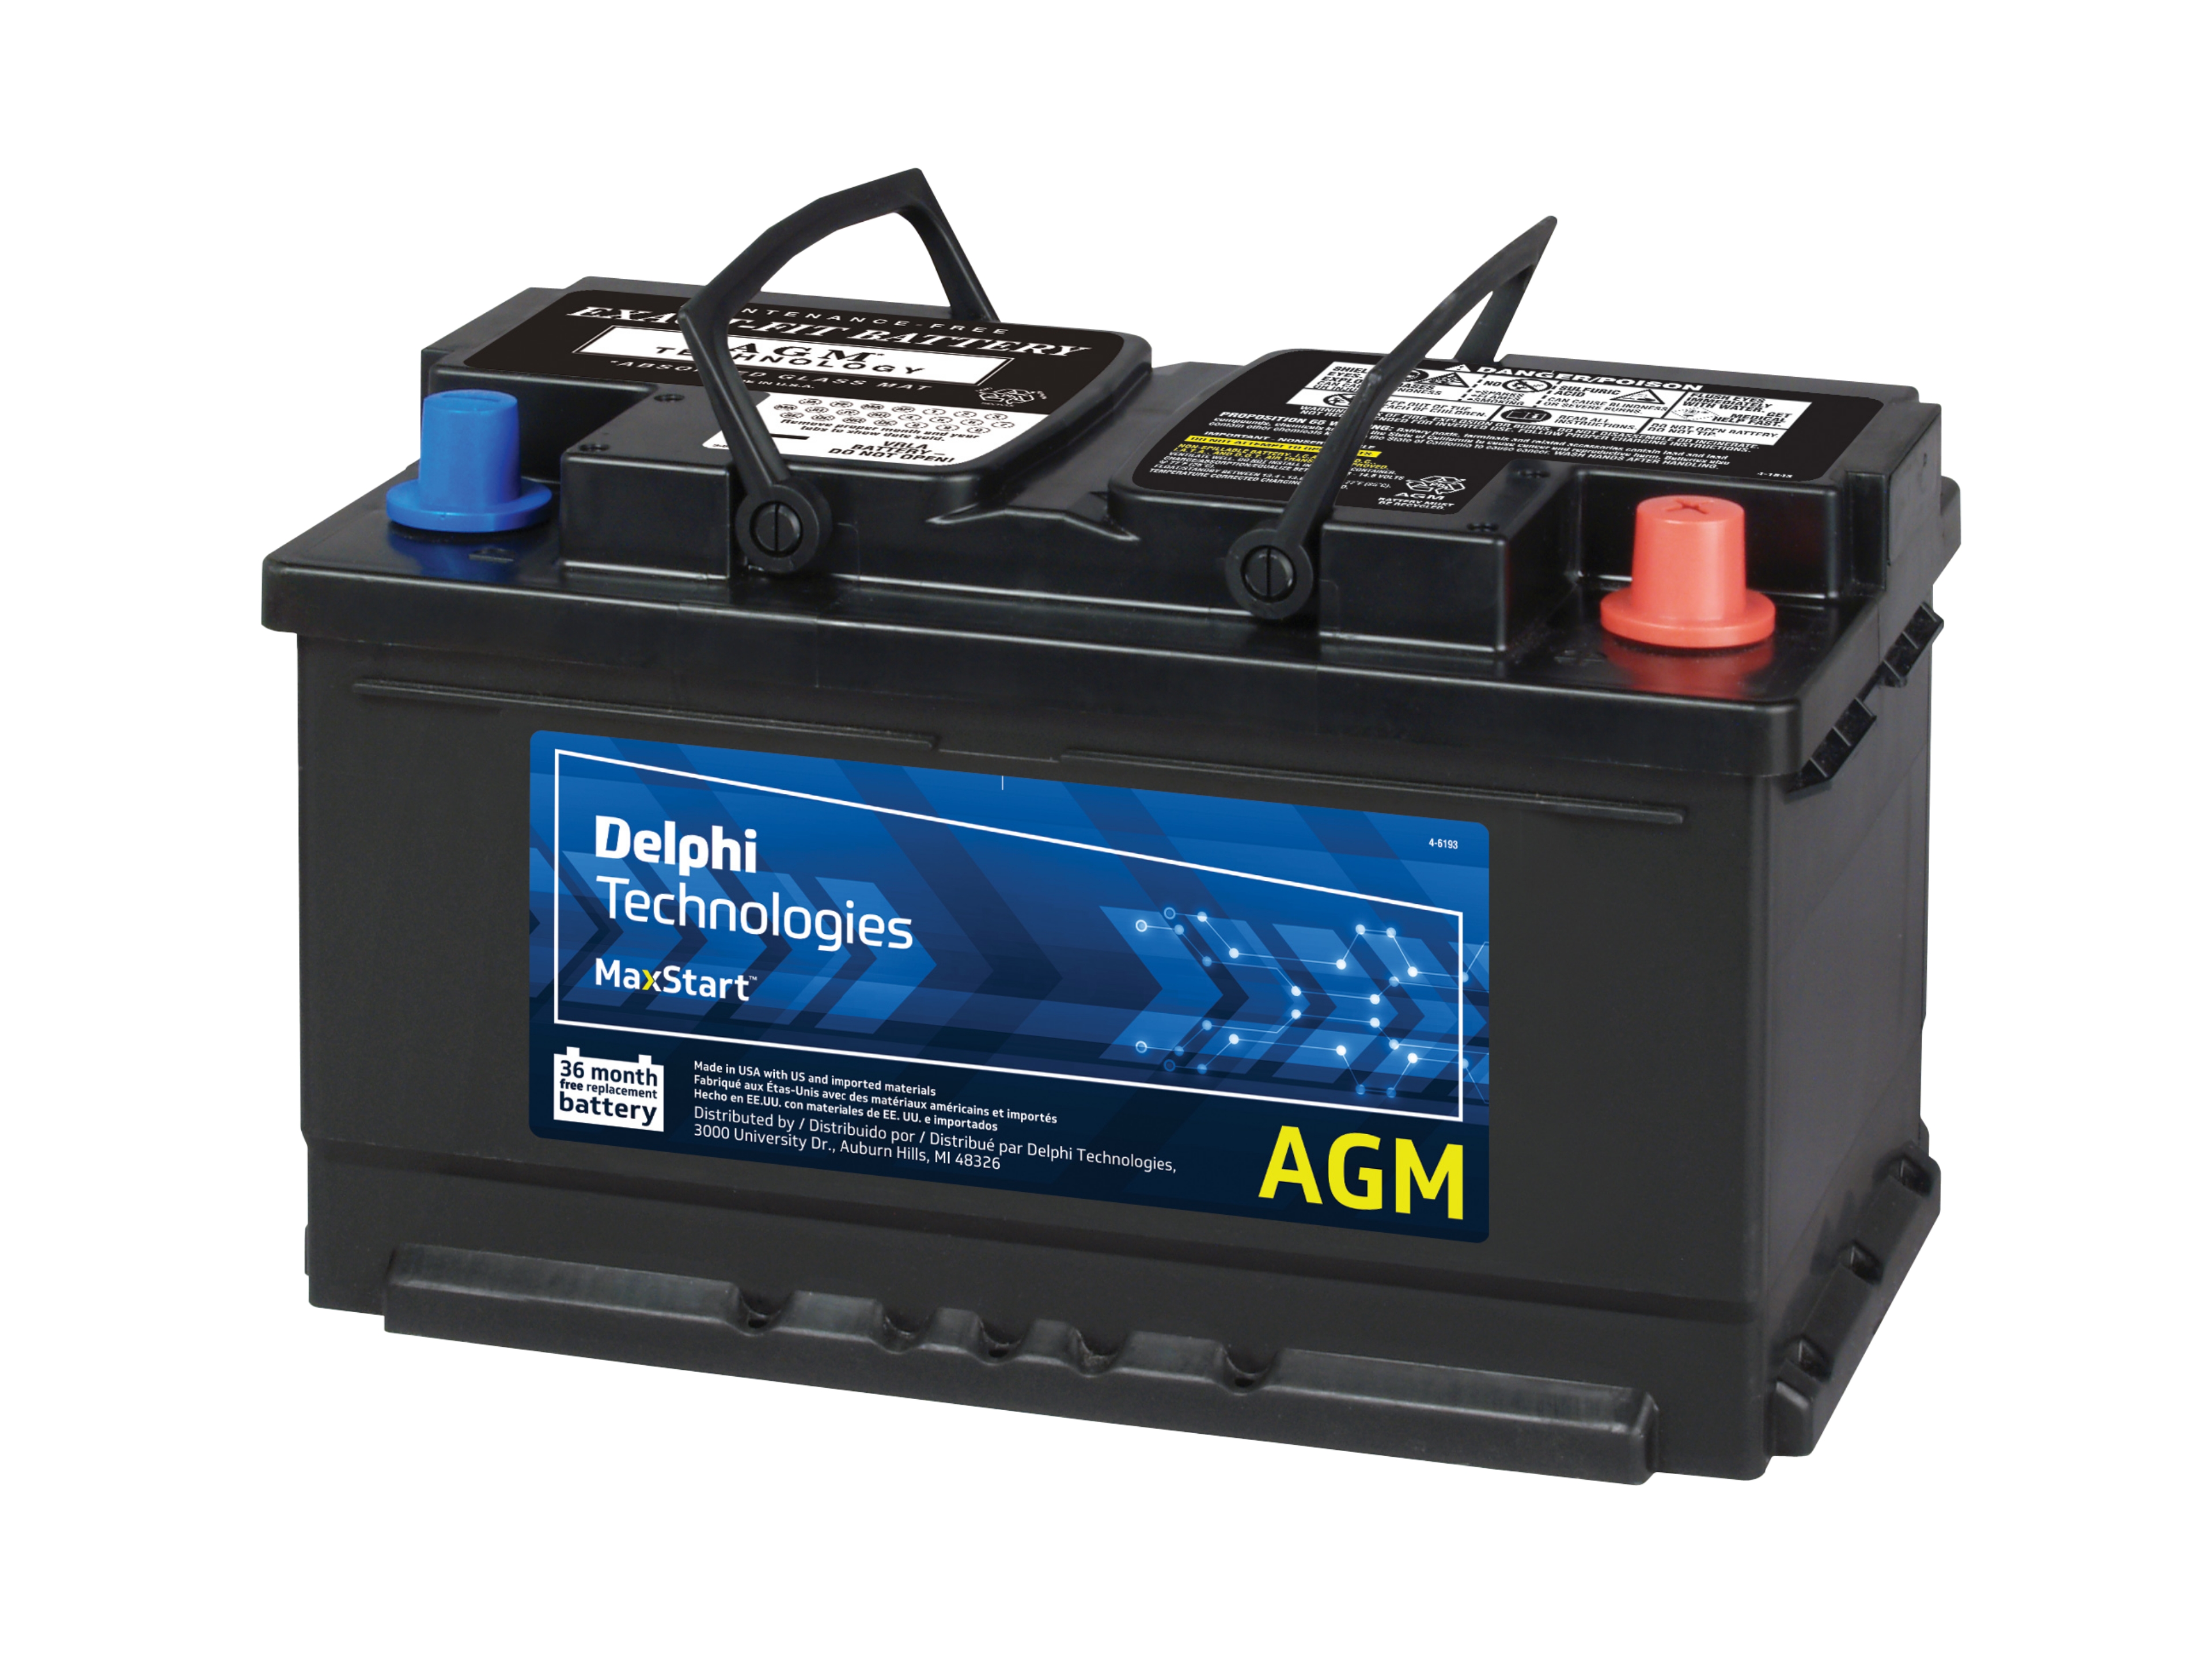 What type of Battery? Lead Acid or AGM, Page 4